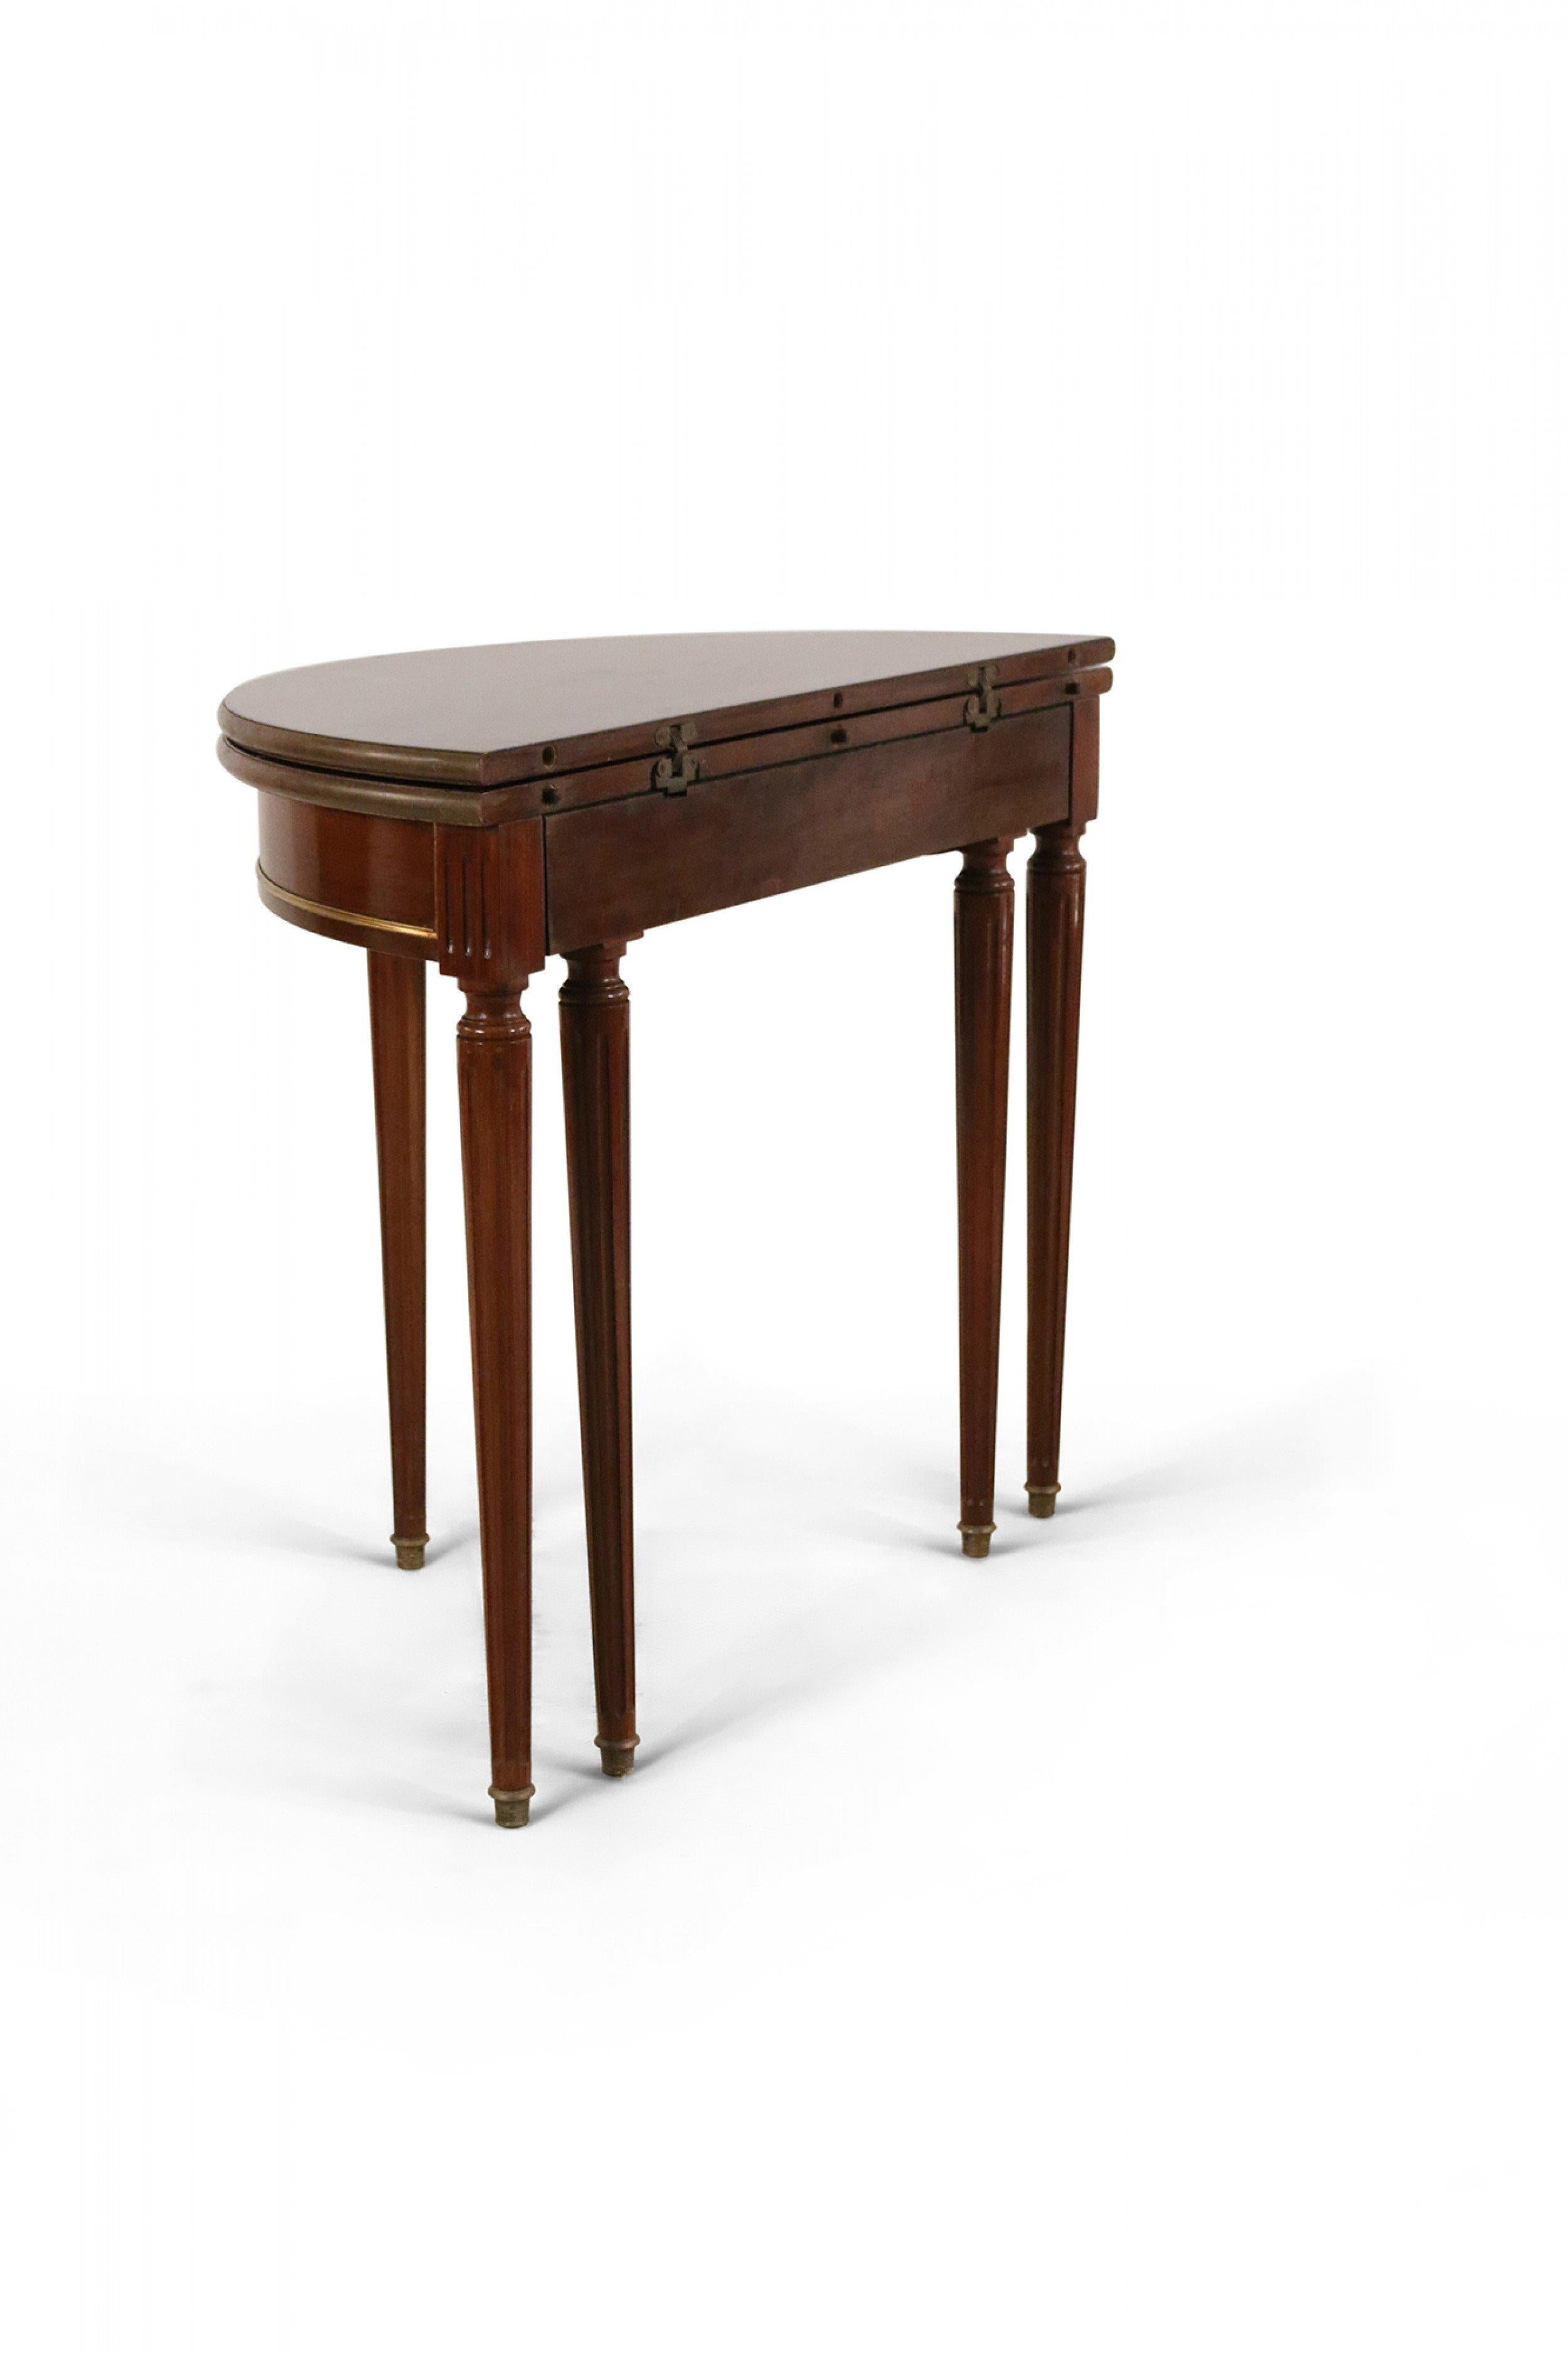 Louis XVI style (19th century) mahogany demilune console table with a fold-open circular top, brass trim detail, and five tapered fluted legs ending in brass end caps.